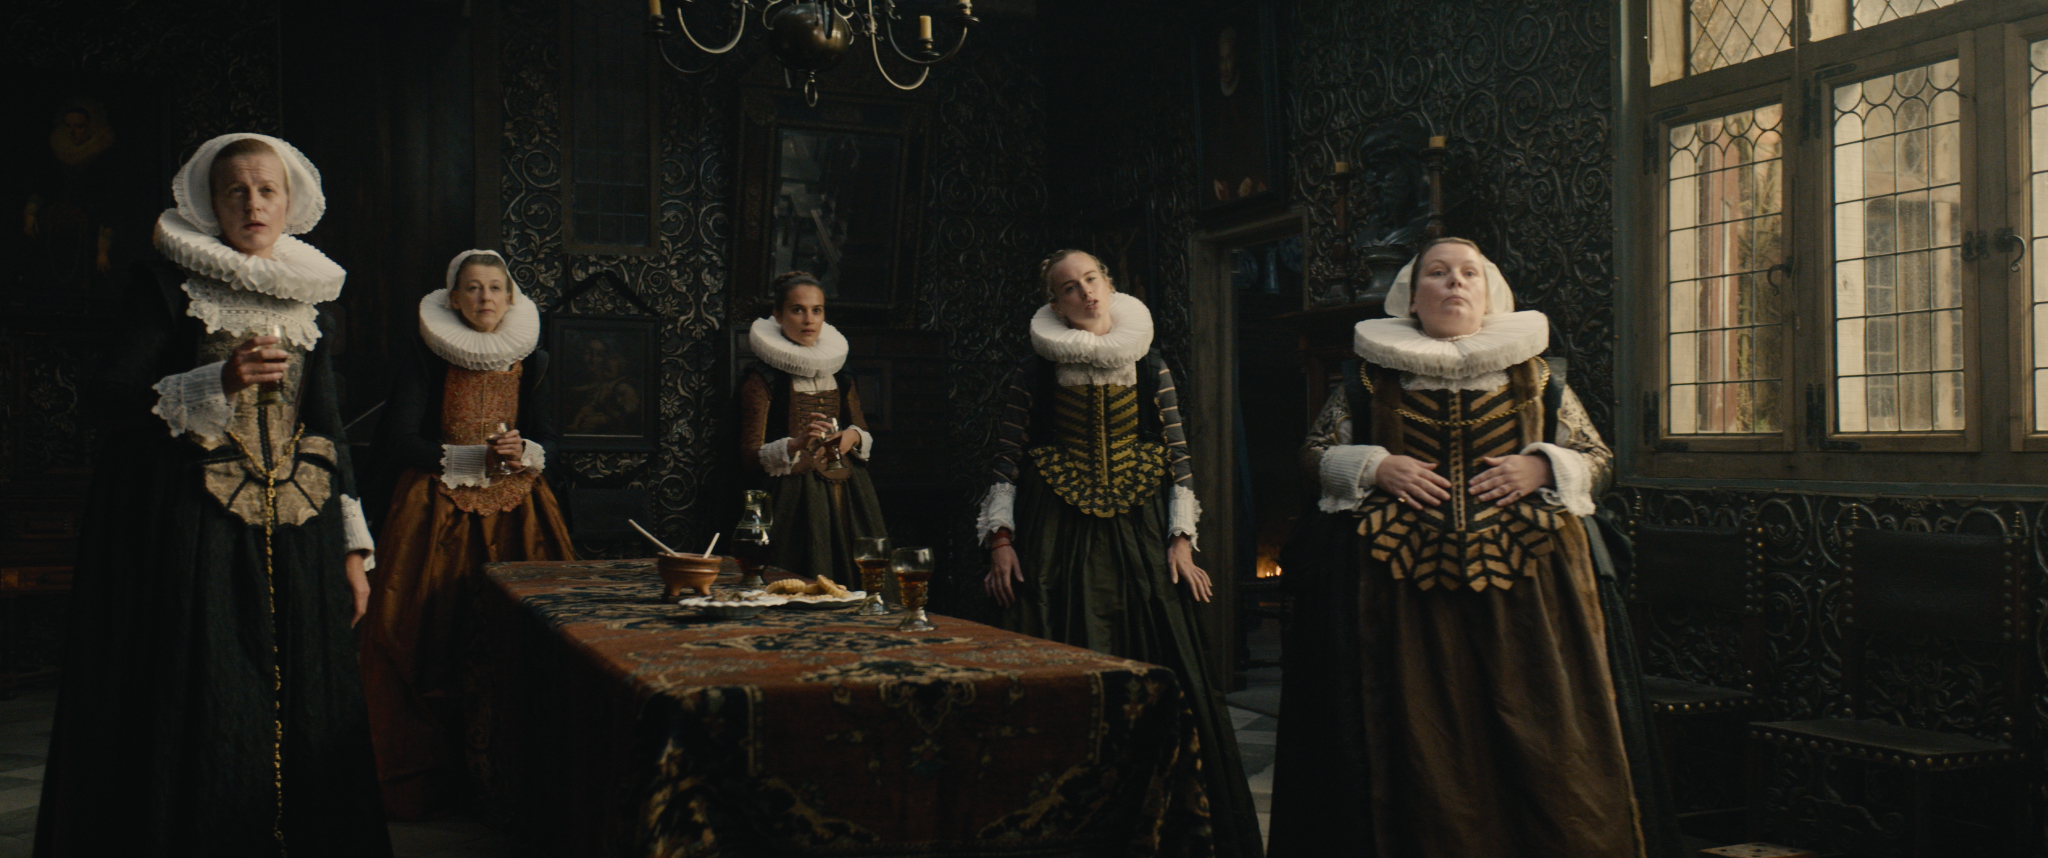 For Tulip Fever, cinematographer Eigil Bryld sought to emulate the lighting evidenced in the paintings of the Dutch Golden Age. 